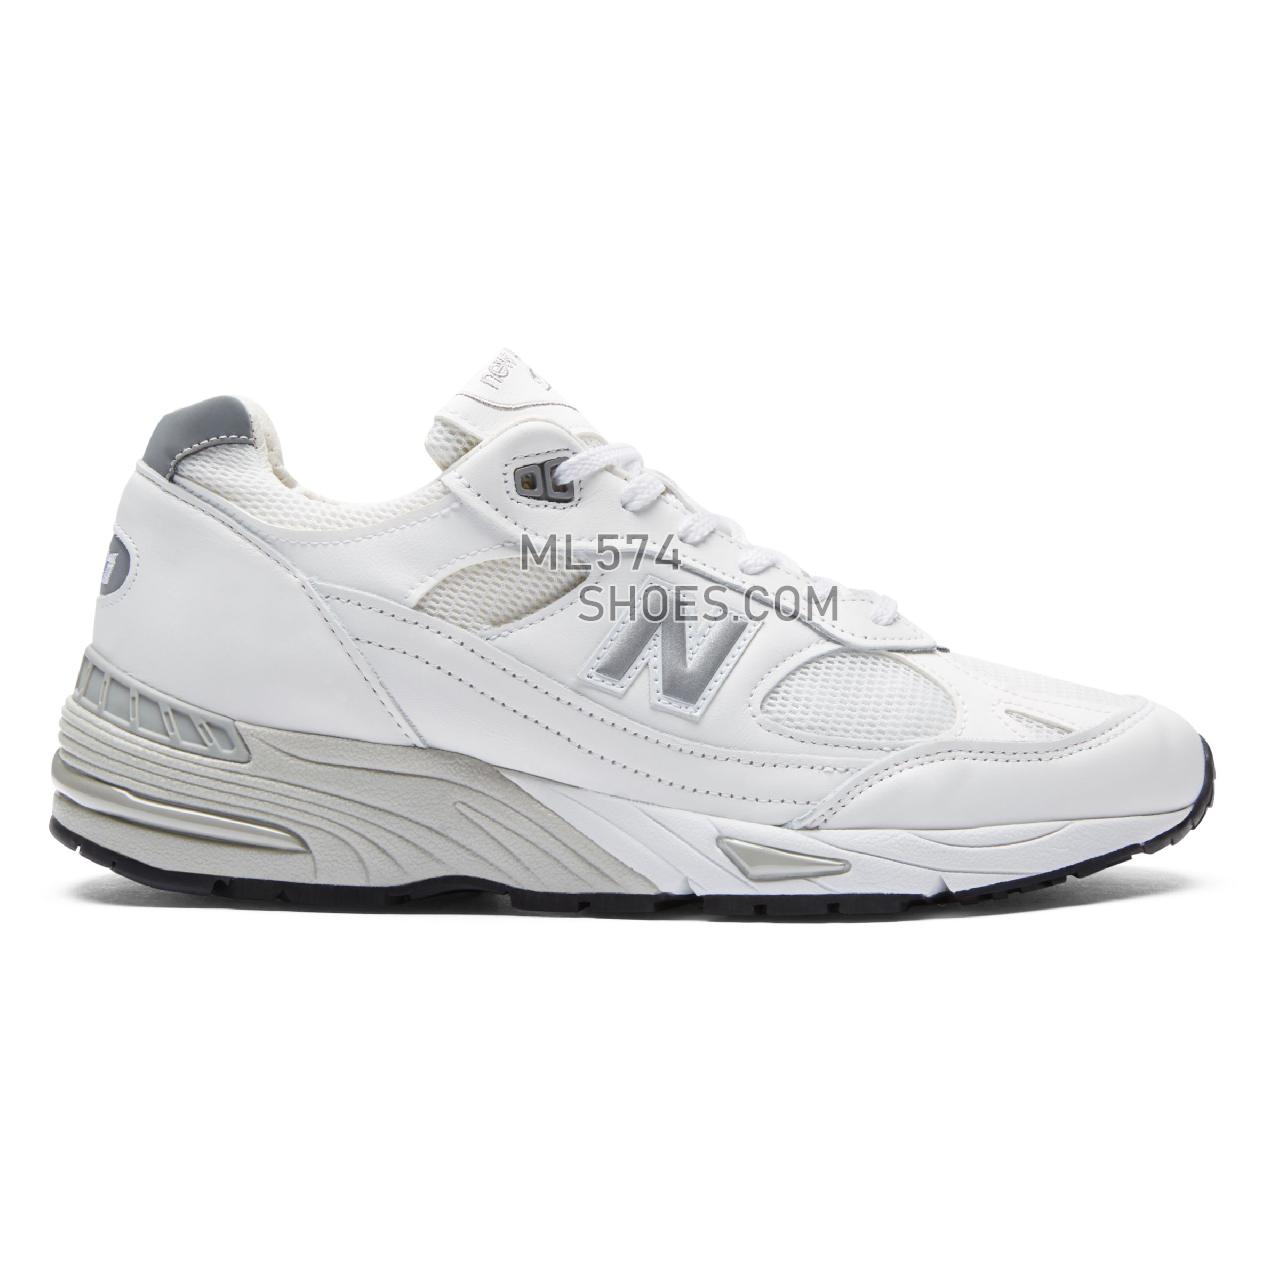 New Balance Made in UK 991 - Men's 991 Made in UK Classic M991-LM - White with Silver - M991WHI